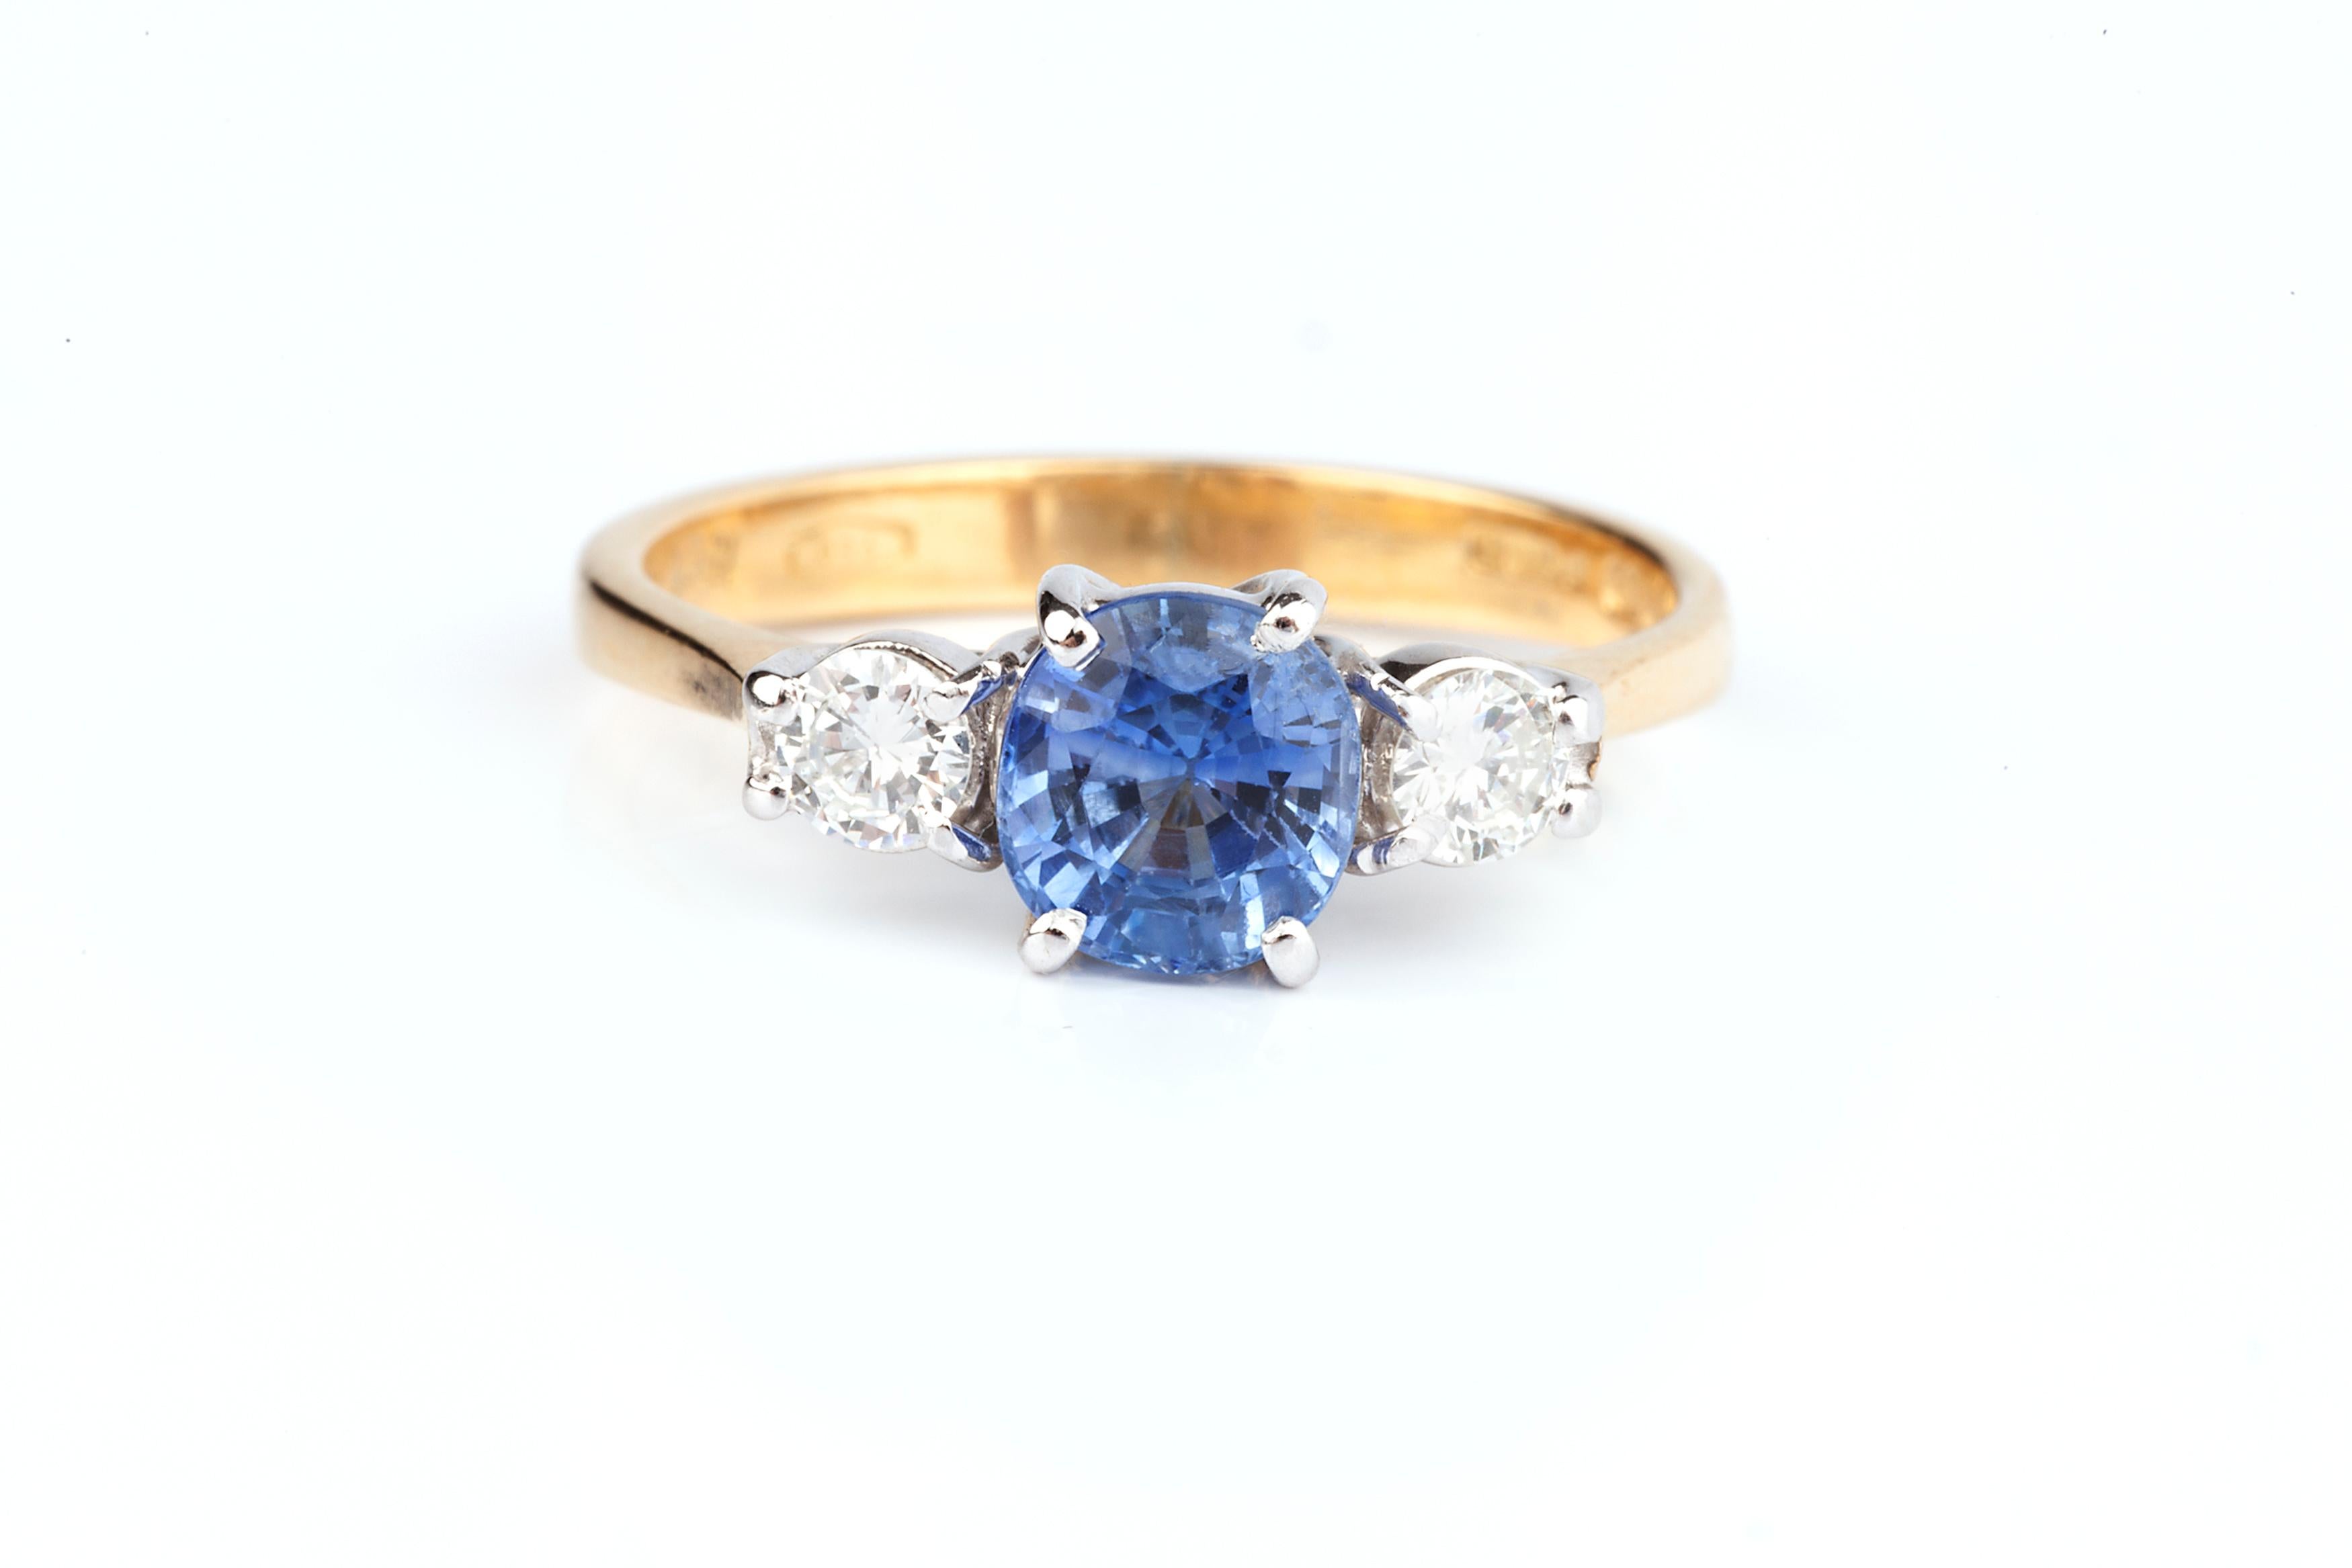 A cornflower blue sapphire and diamond trilogy ring, set with a central cornflower blue sapphire which is eye clean beautiful stone and two diamonds totalling in 0.3cts VS2 clarity. It is set in 18 karat gold and fully hallmarked. This is a vintage